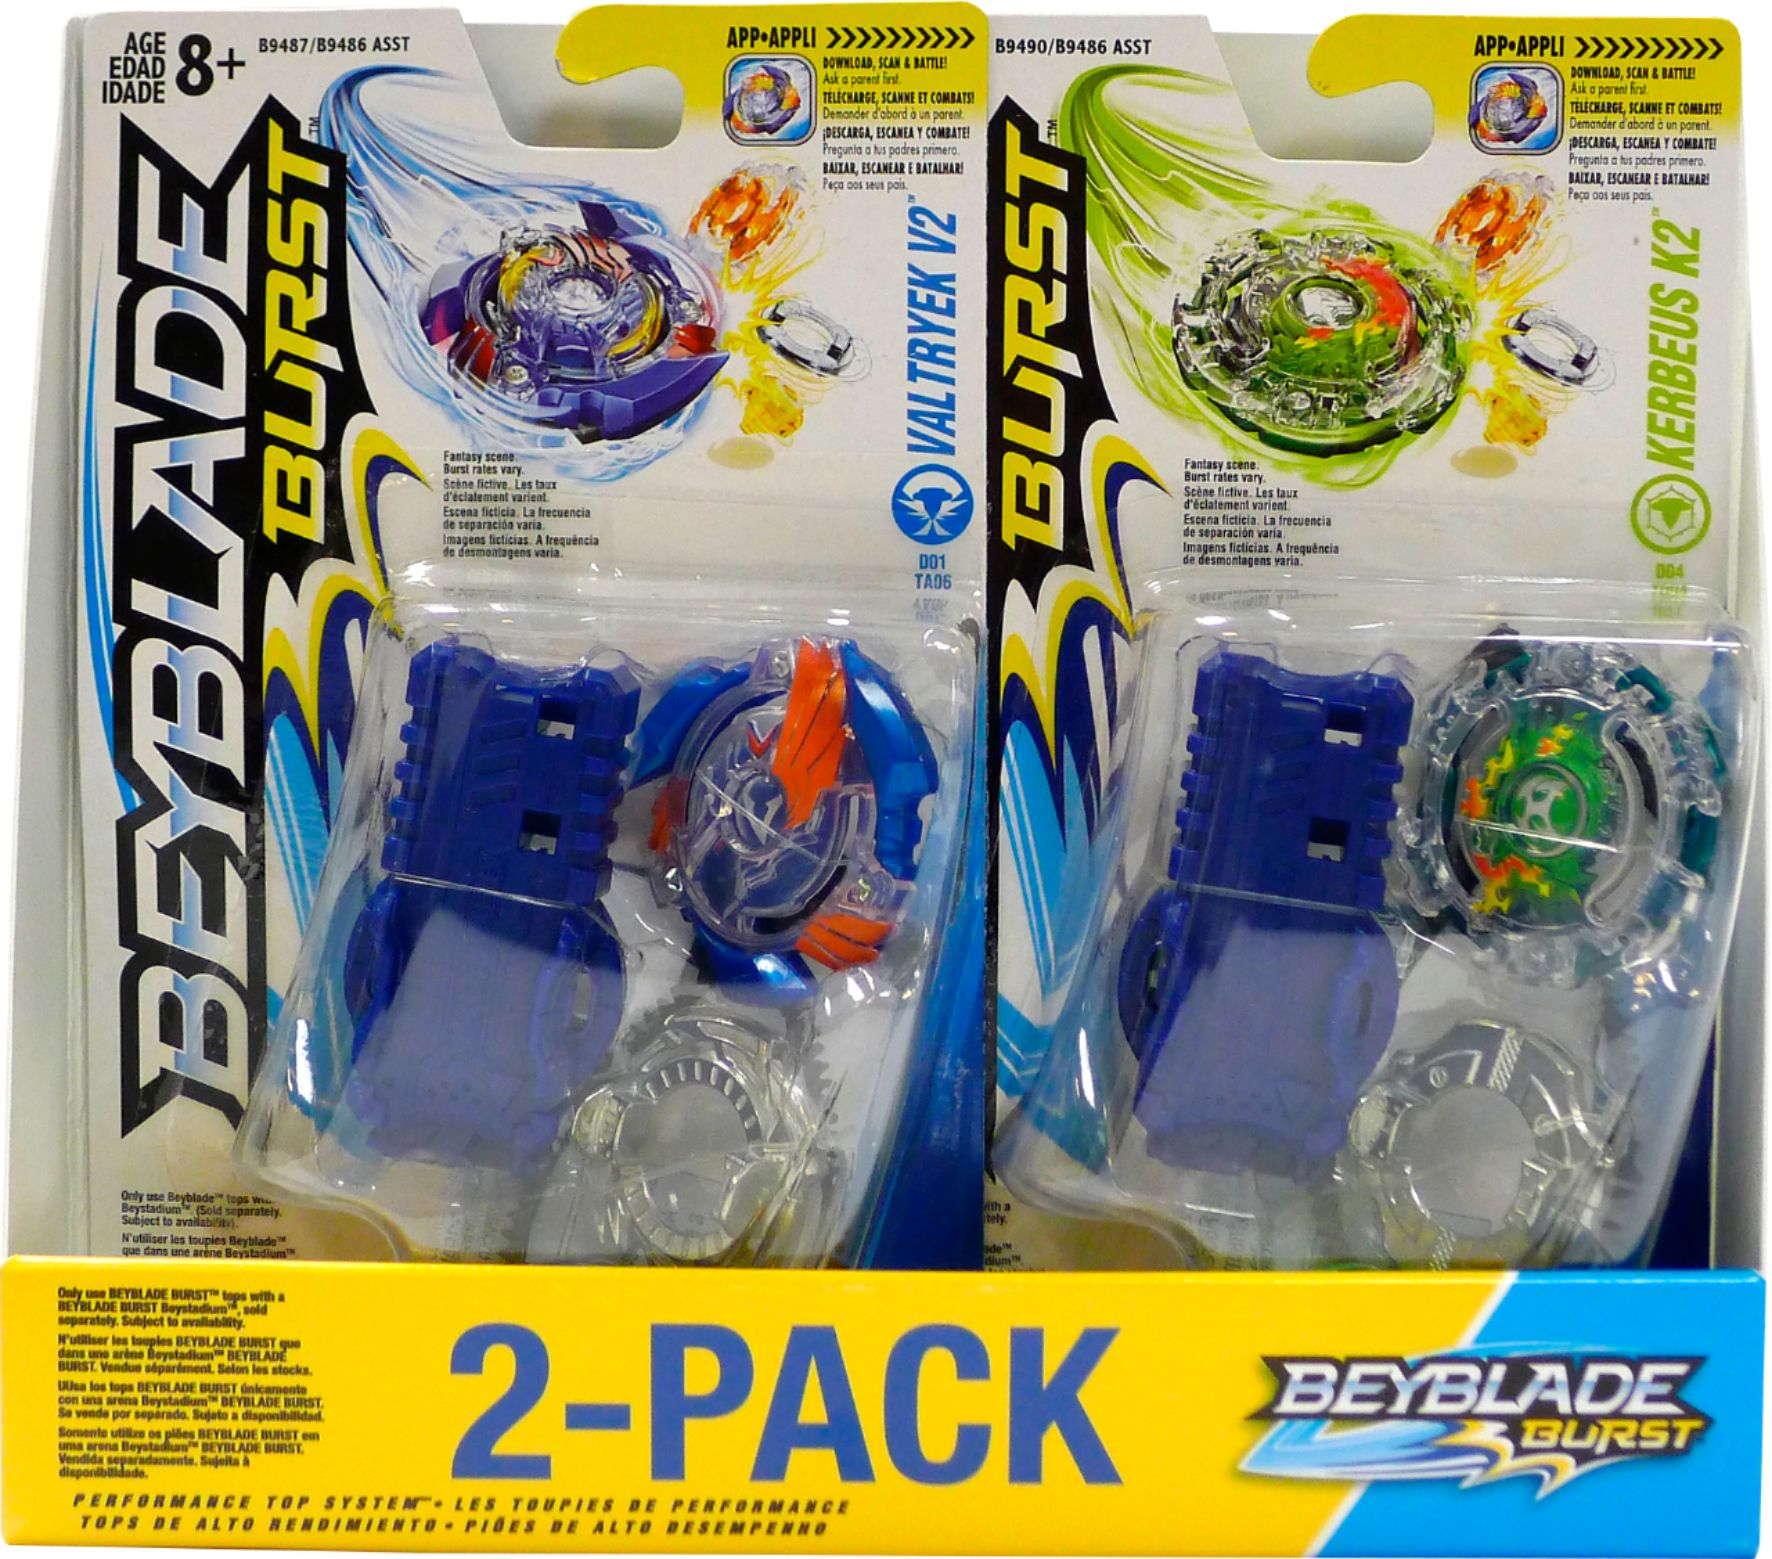 Beyblades Starter Pack by HASBRO, INC.